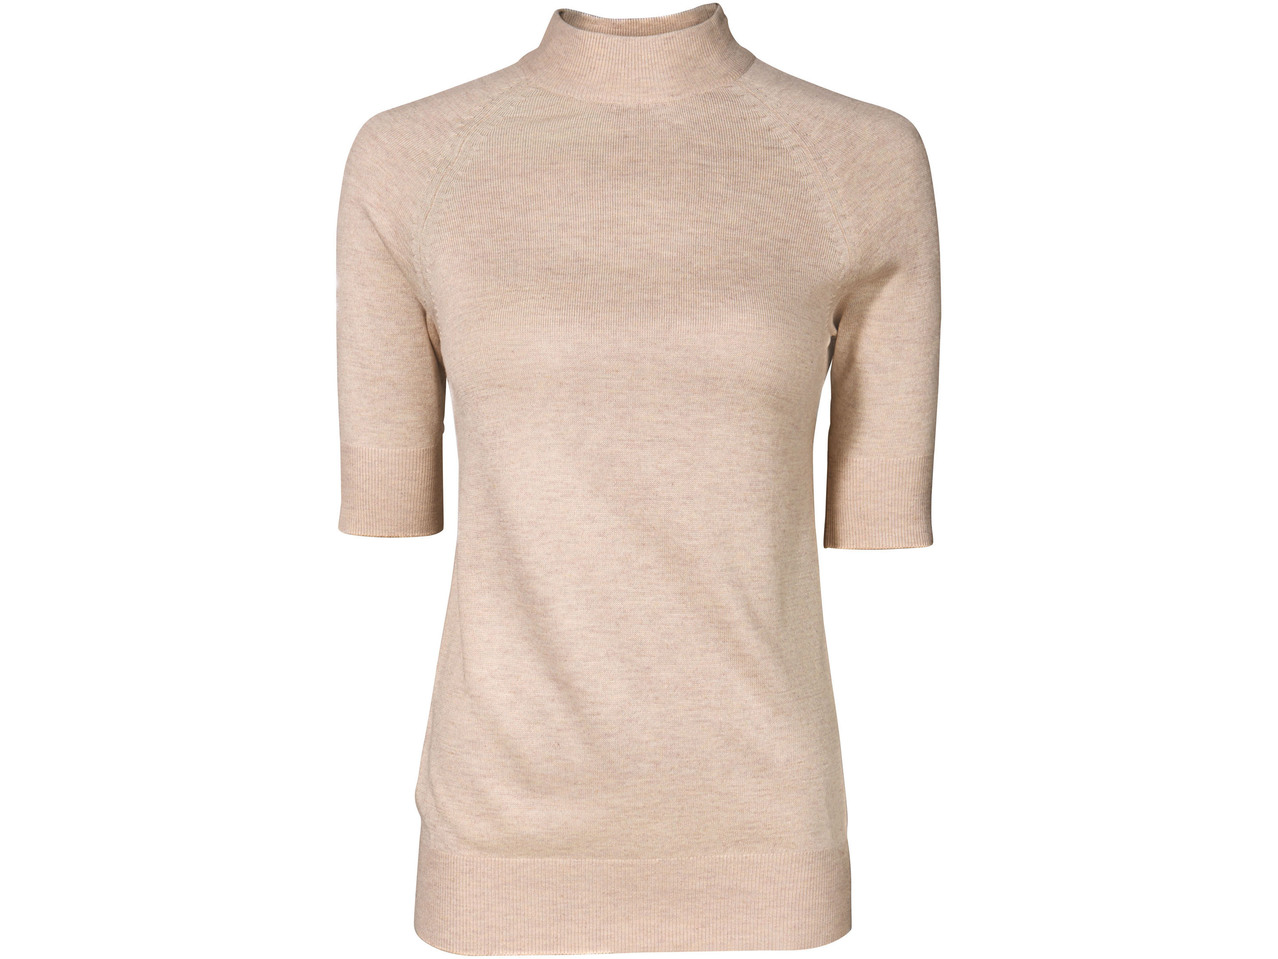 Ladies' Knitted Top